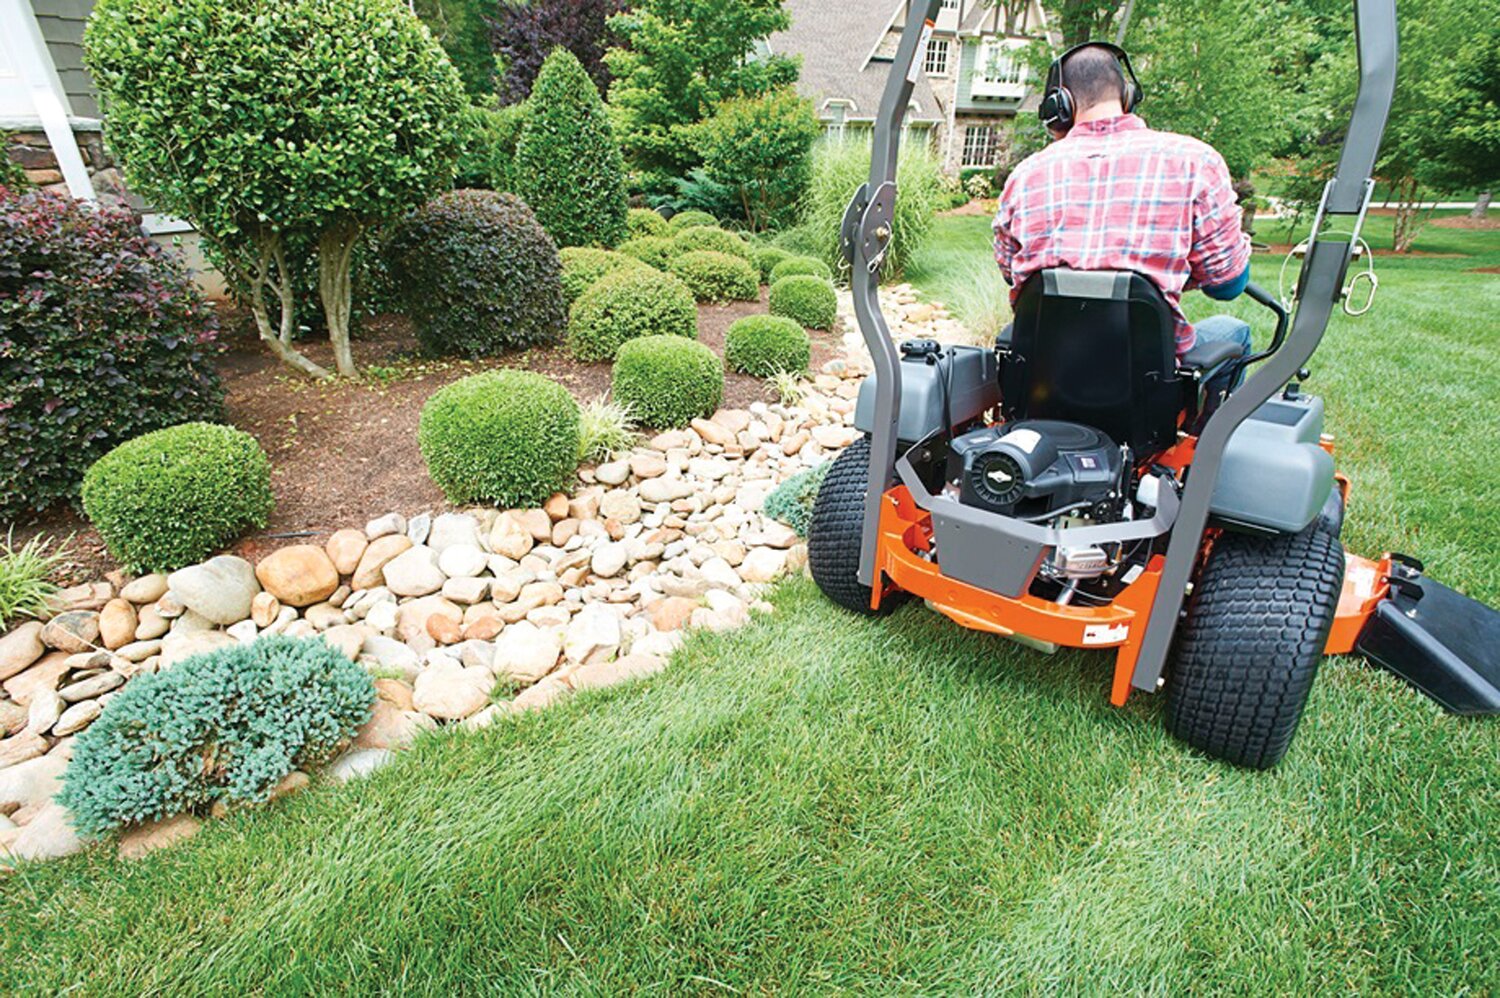 The Outdoor Power Equipment Institute provides tips to selecting the machinery to help get the backyard ready for summer.